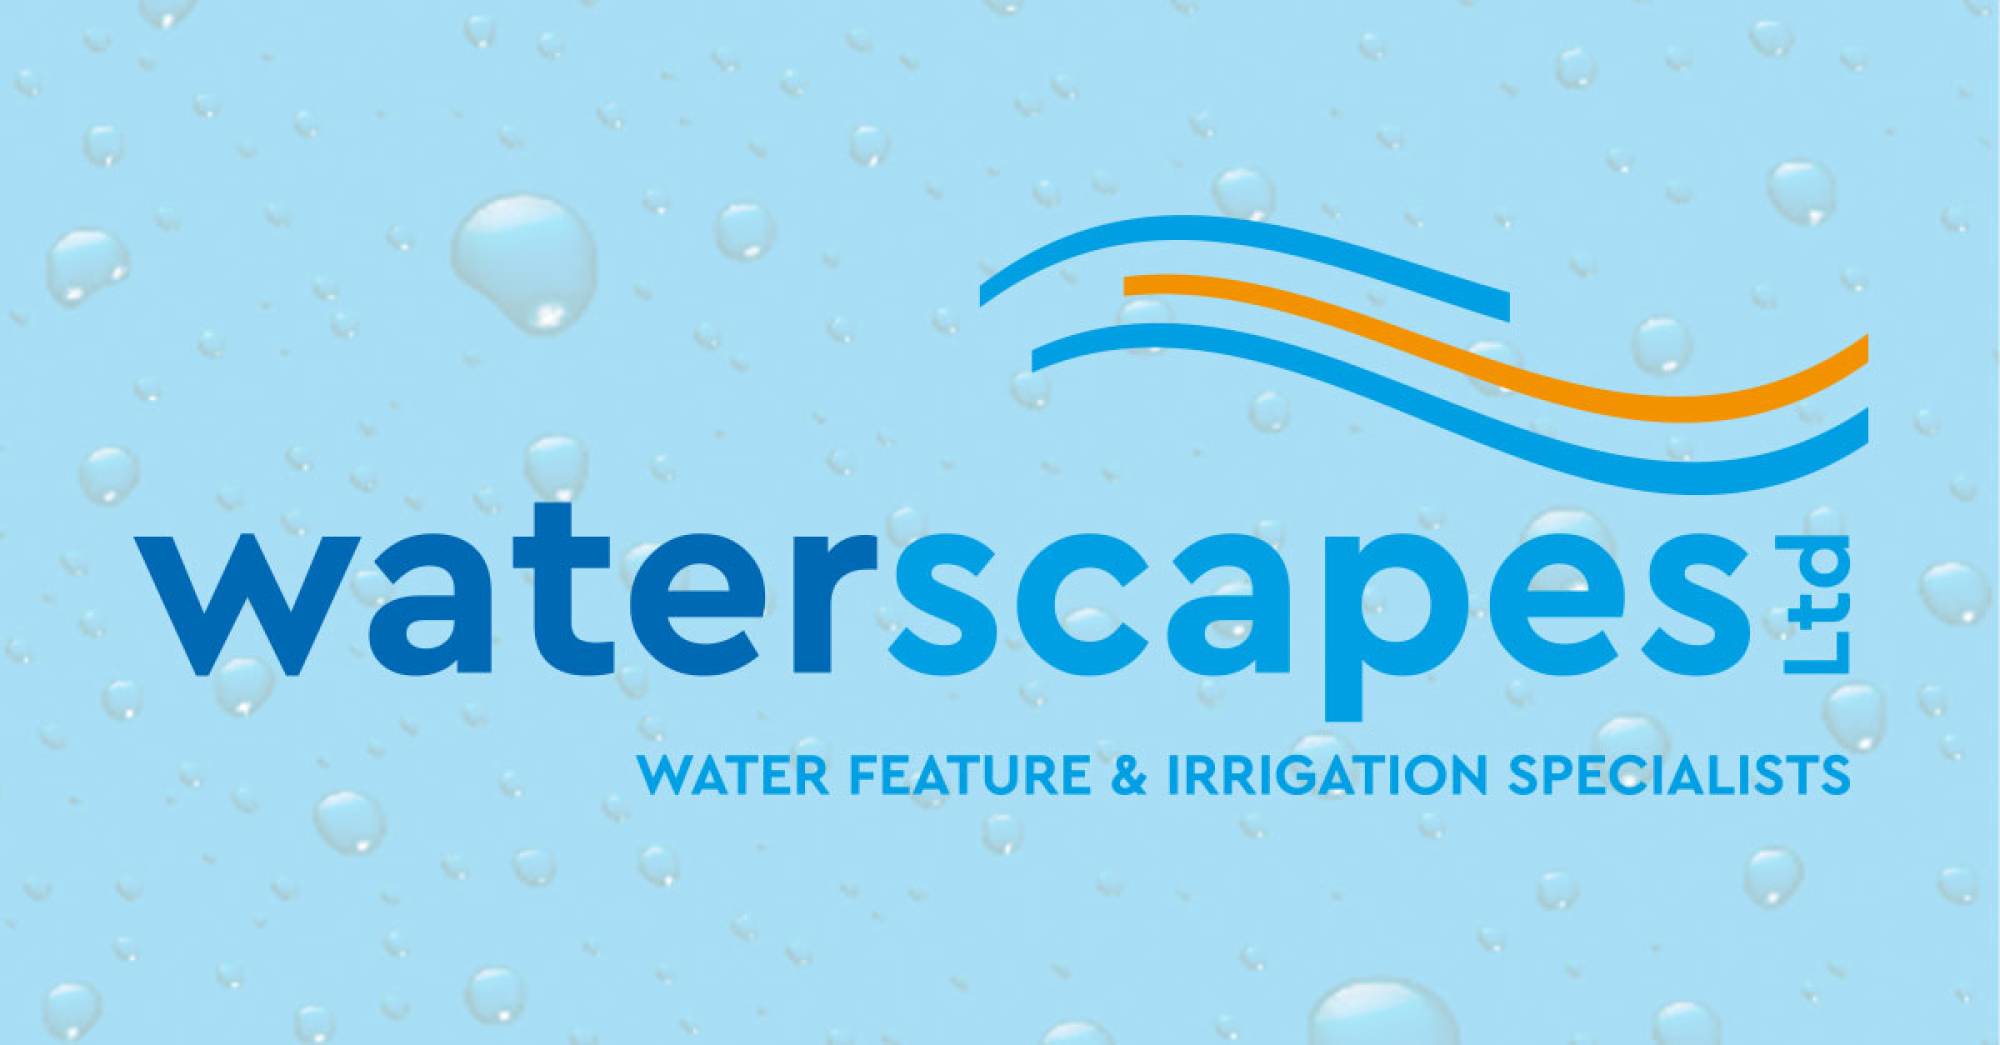 waterscapes-header.jpg
Waterscapes - Your Trusted Water Feature & Irrigation Specialist